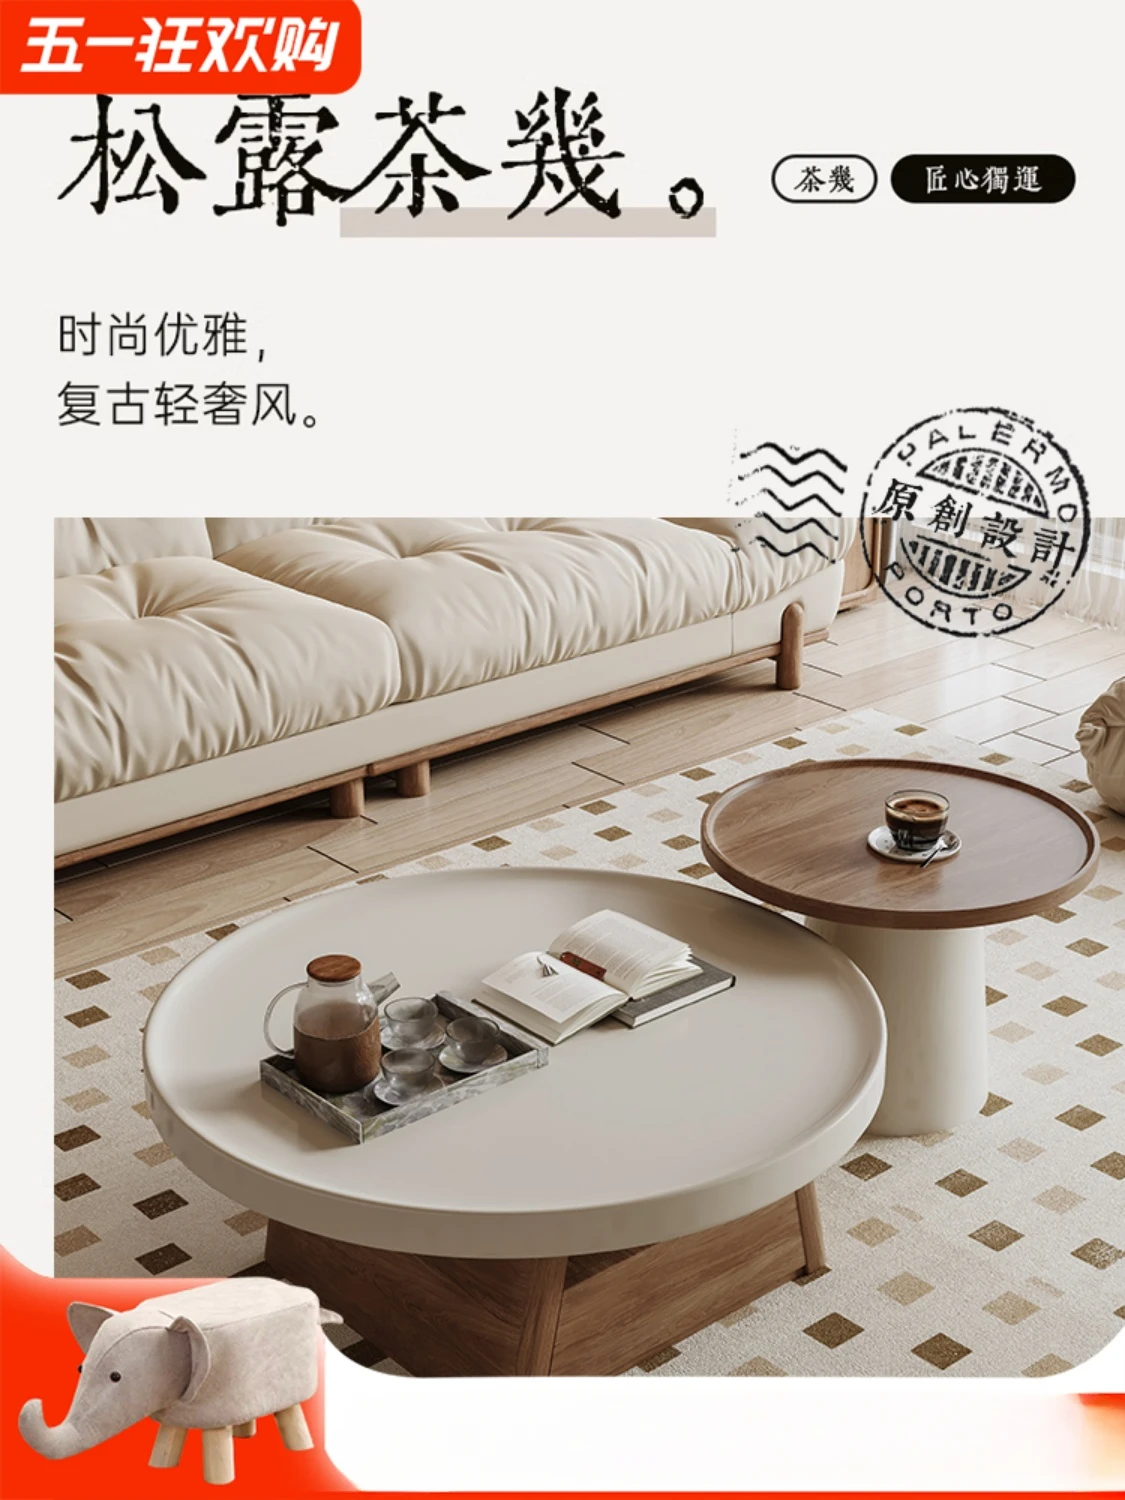 

Tea table, living room, household small unit, simple size, round tea table, retro medieval style, round tea table, TV cabinet